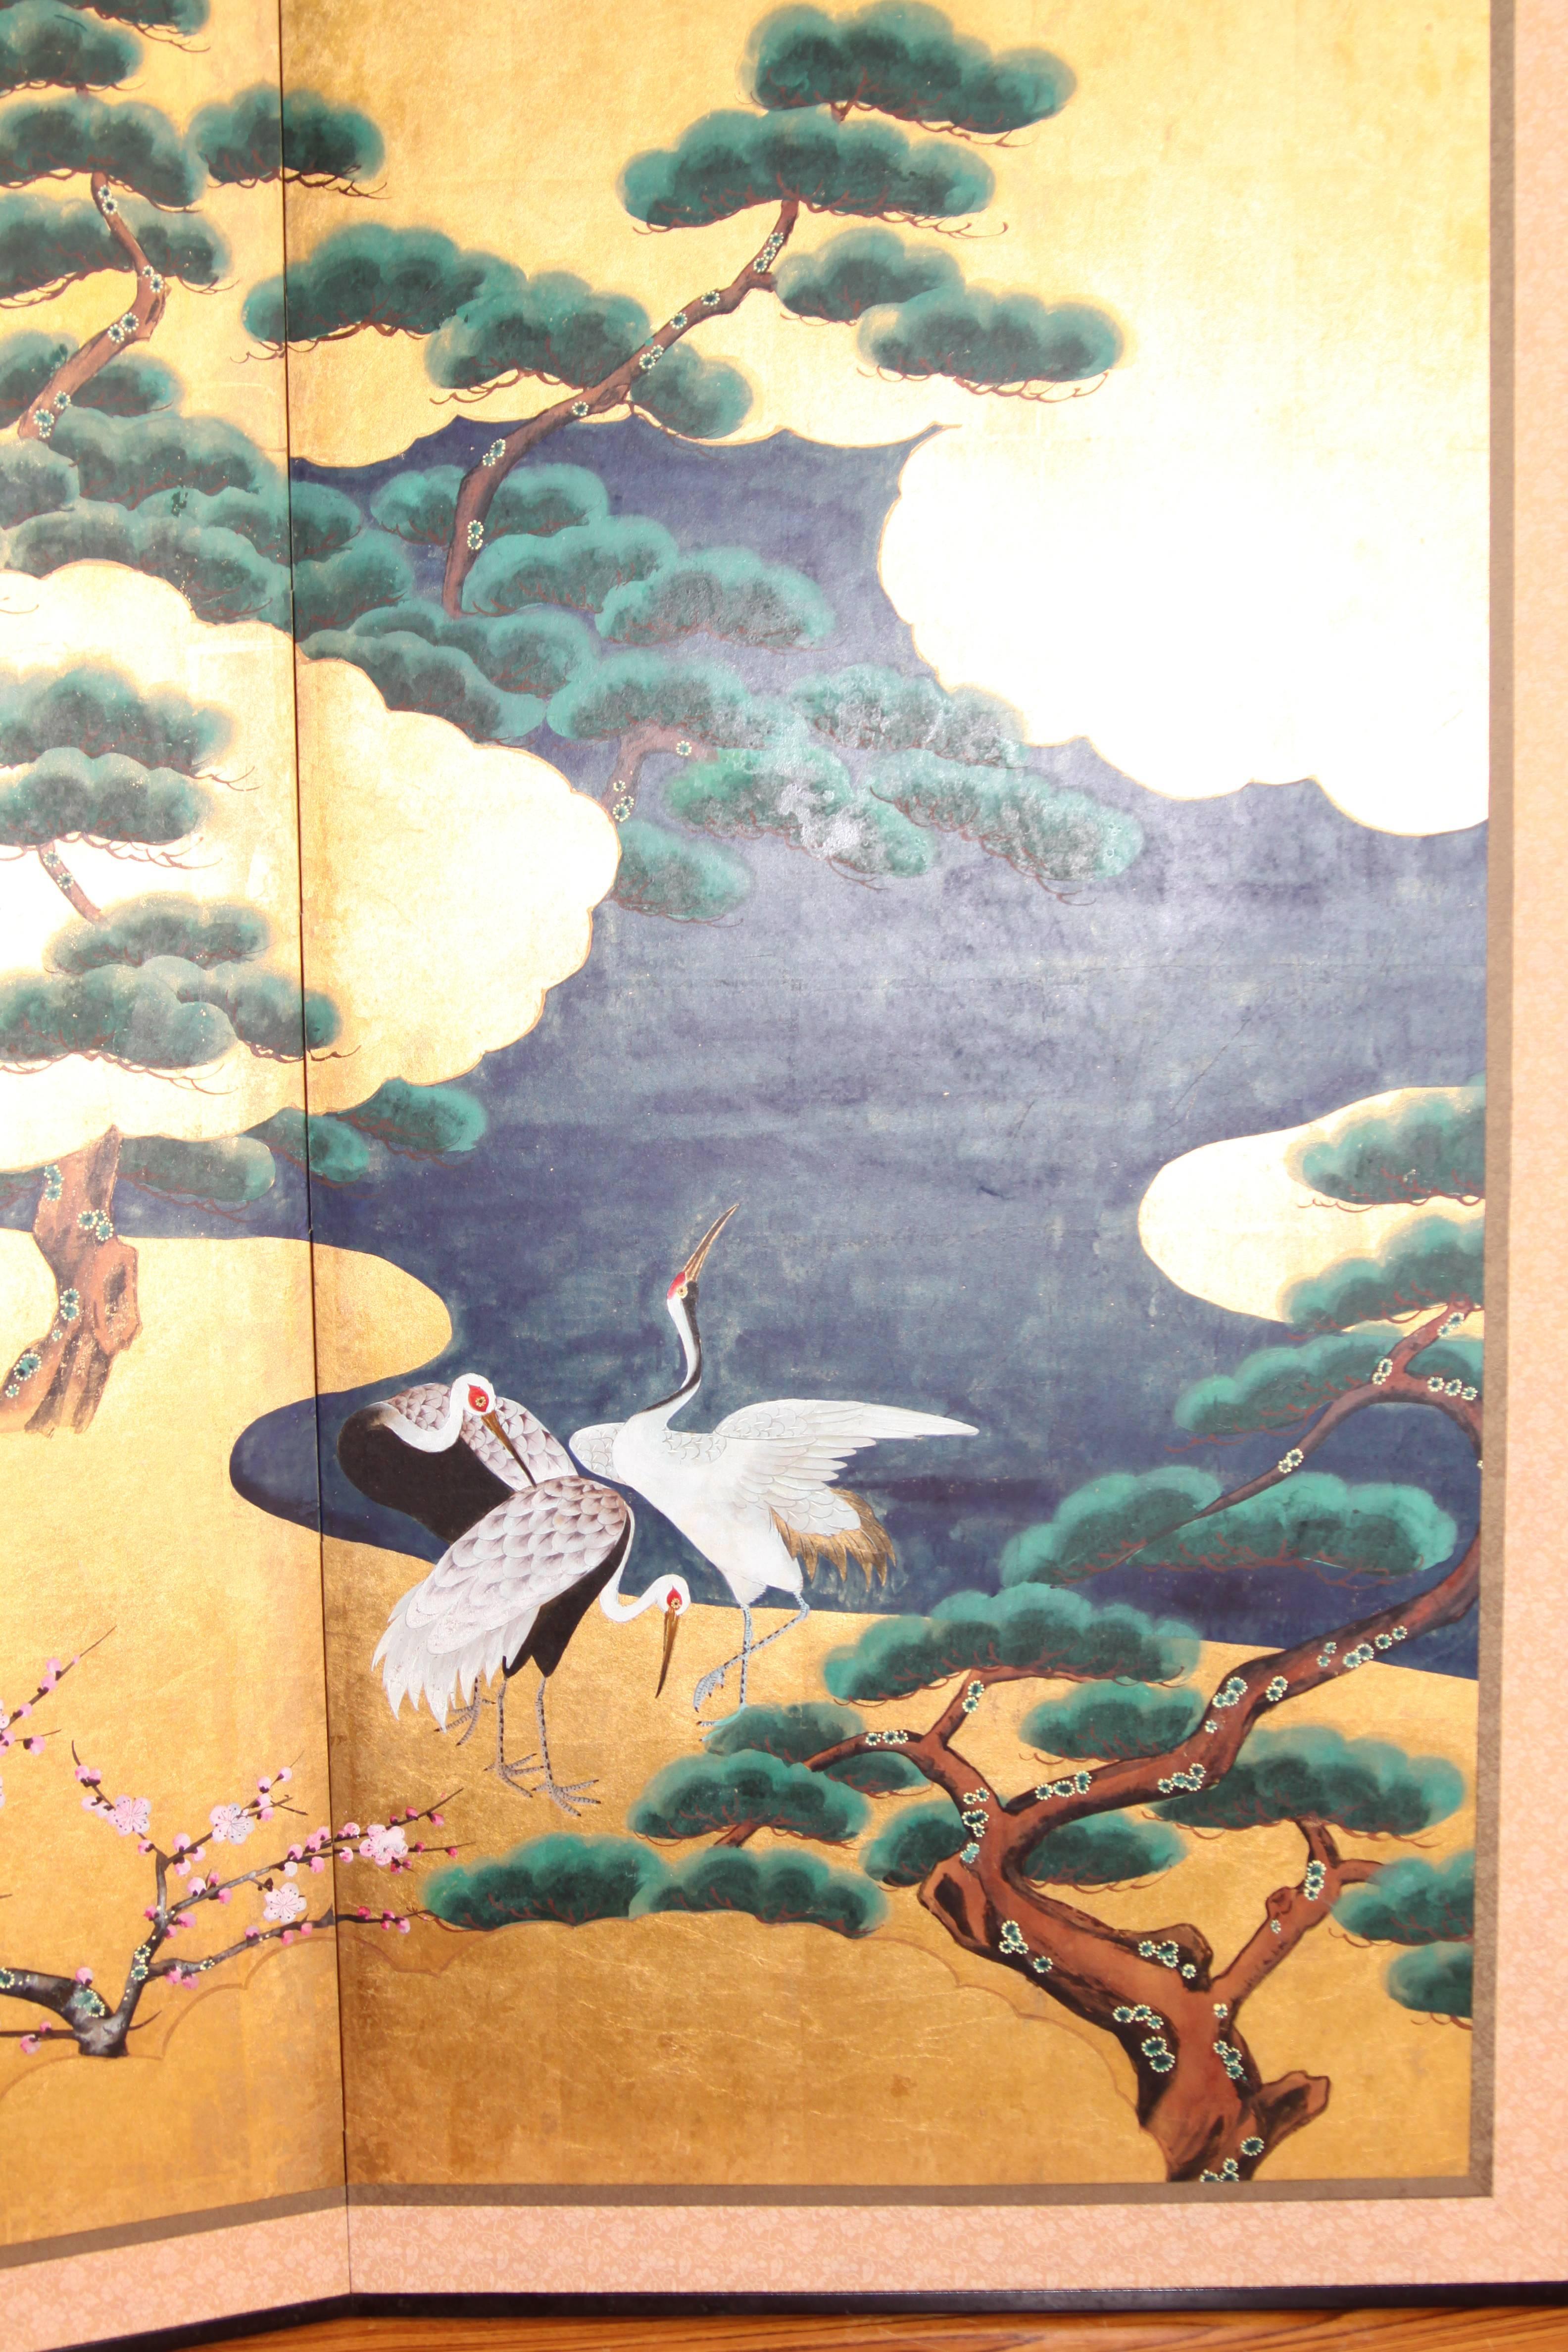 Asian Handpainted Japanese Folding Screen 'Byobu' Cranes by the River, Gold Leaf